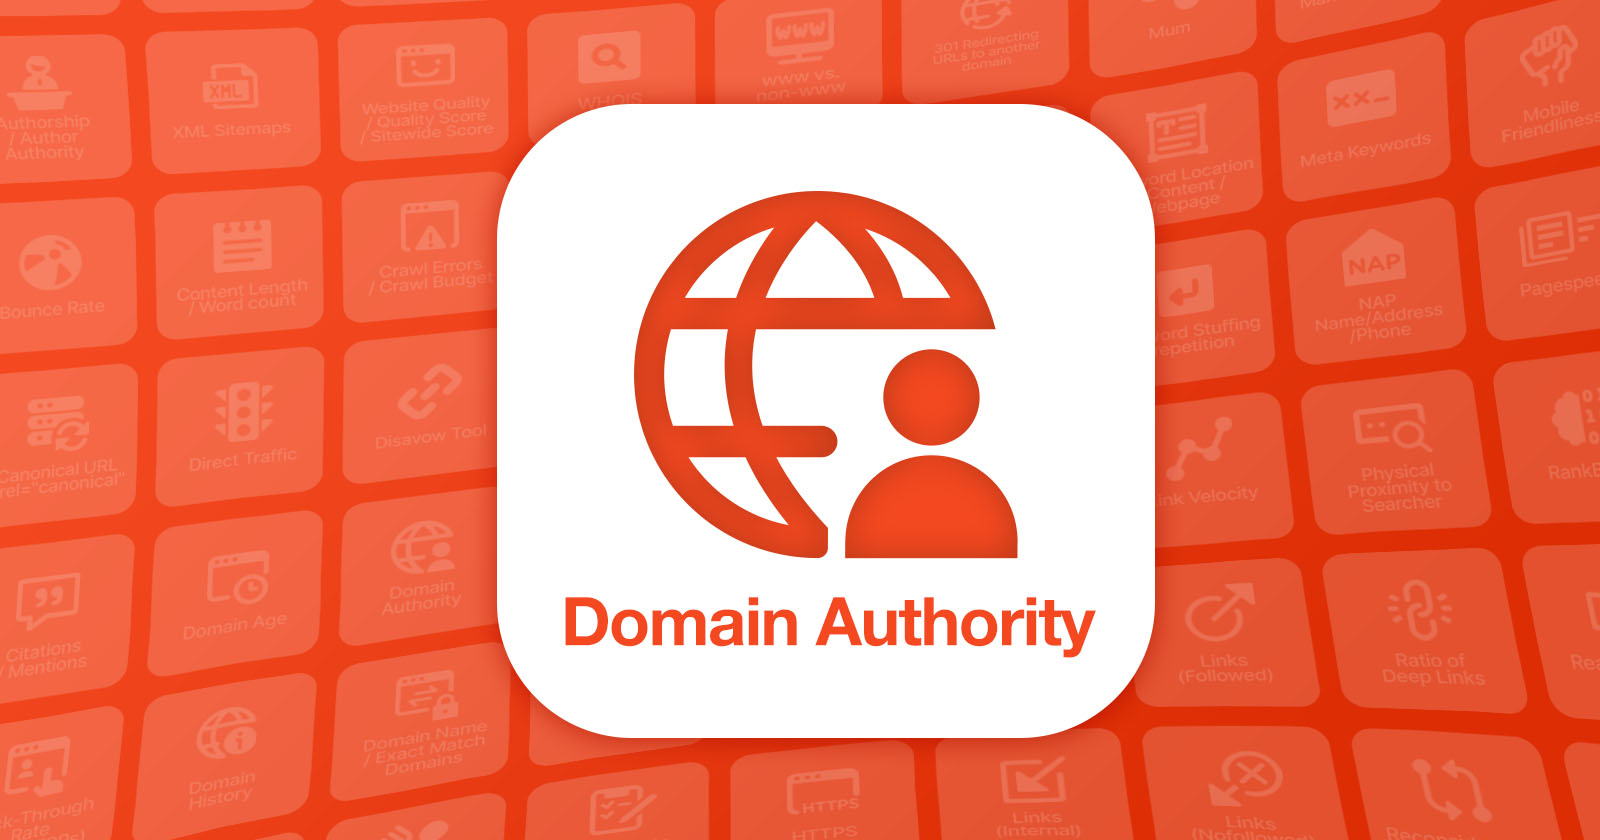 domain authority 63565a8bc7d4f sej